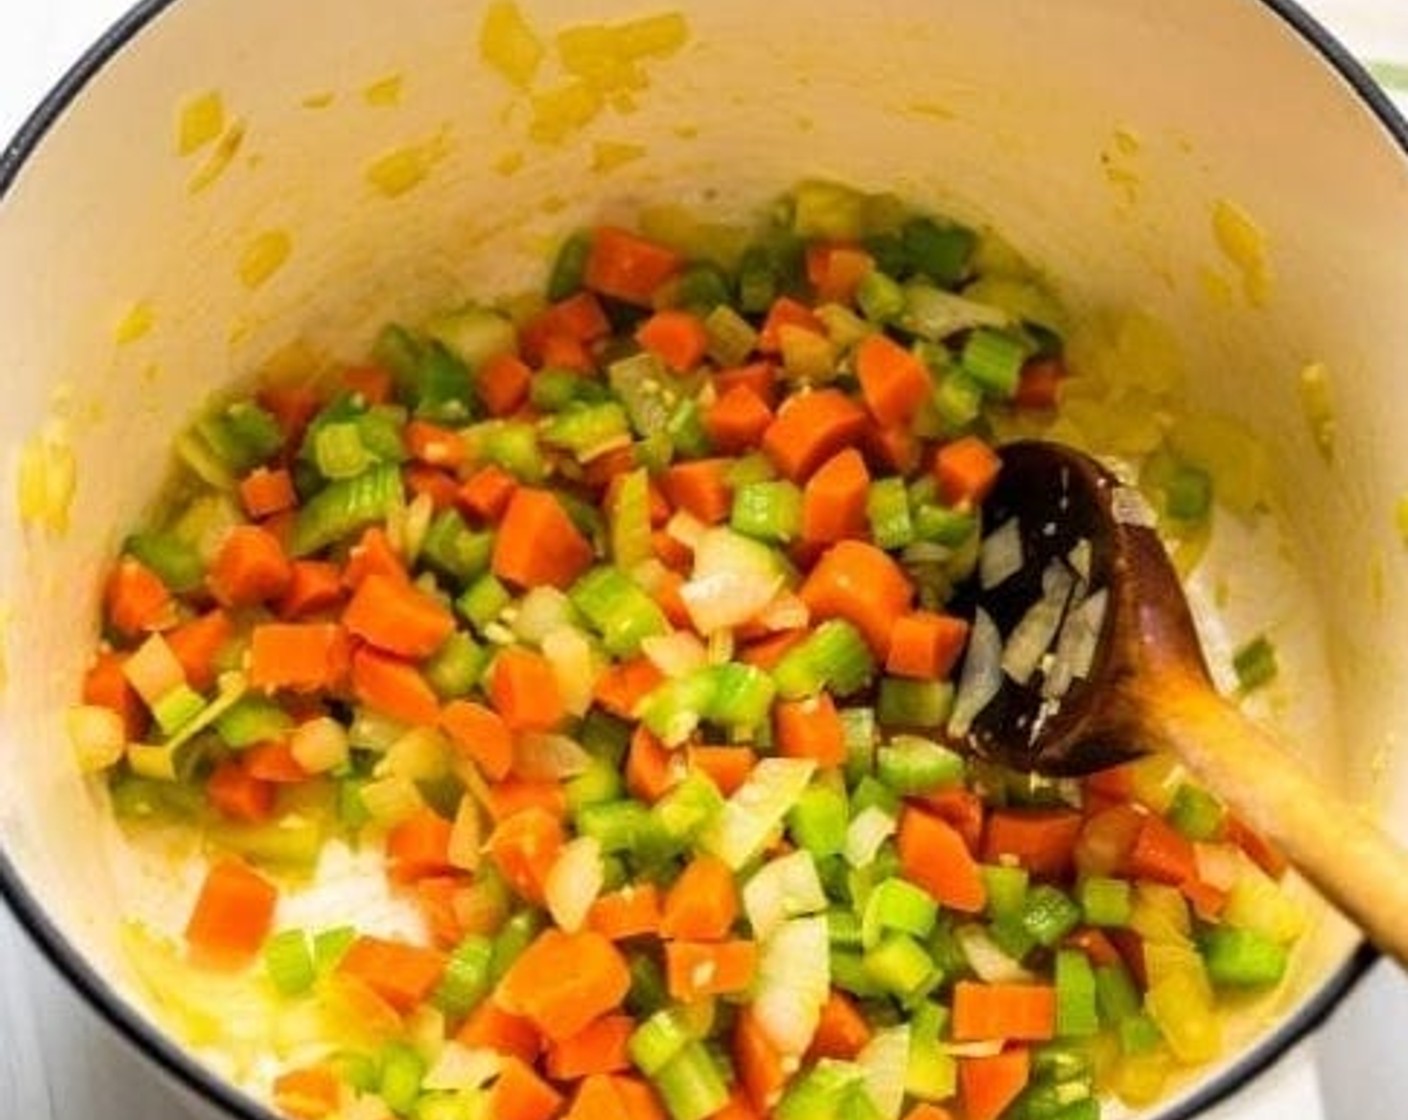 step 1 In a large pot or Dutch Oven, heat the Olive Oil (2 Tbsp) over medium-high heat. Add the Yellow Onion (1), Carrots (4), and Celery (3 stalks) and sauté until the vegetables are tender and the celery and onions are slightly translucent.